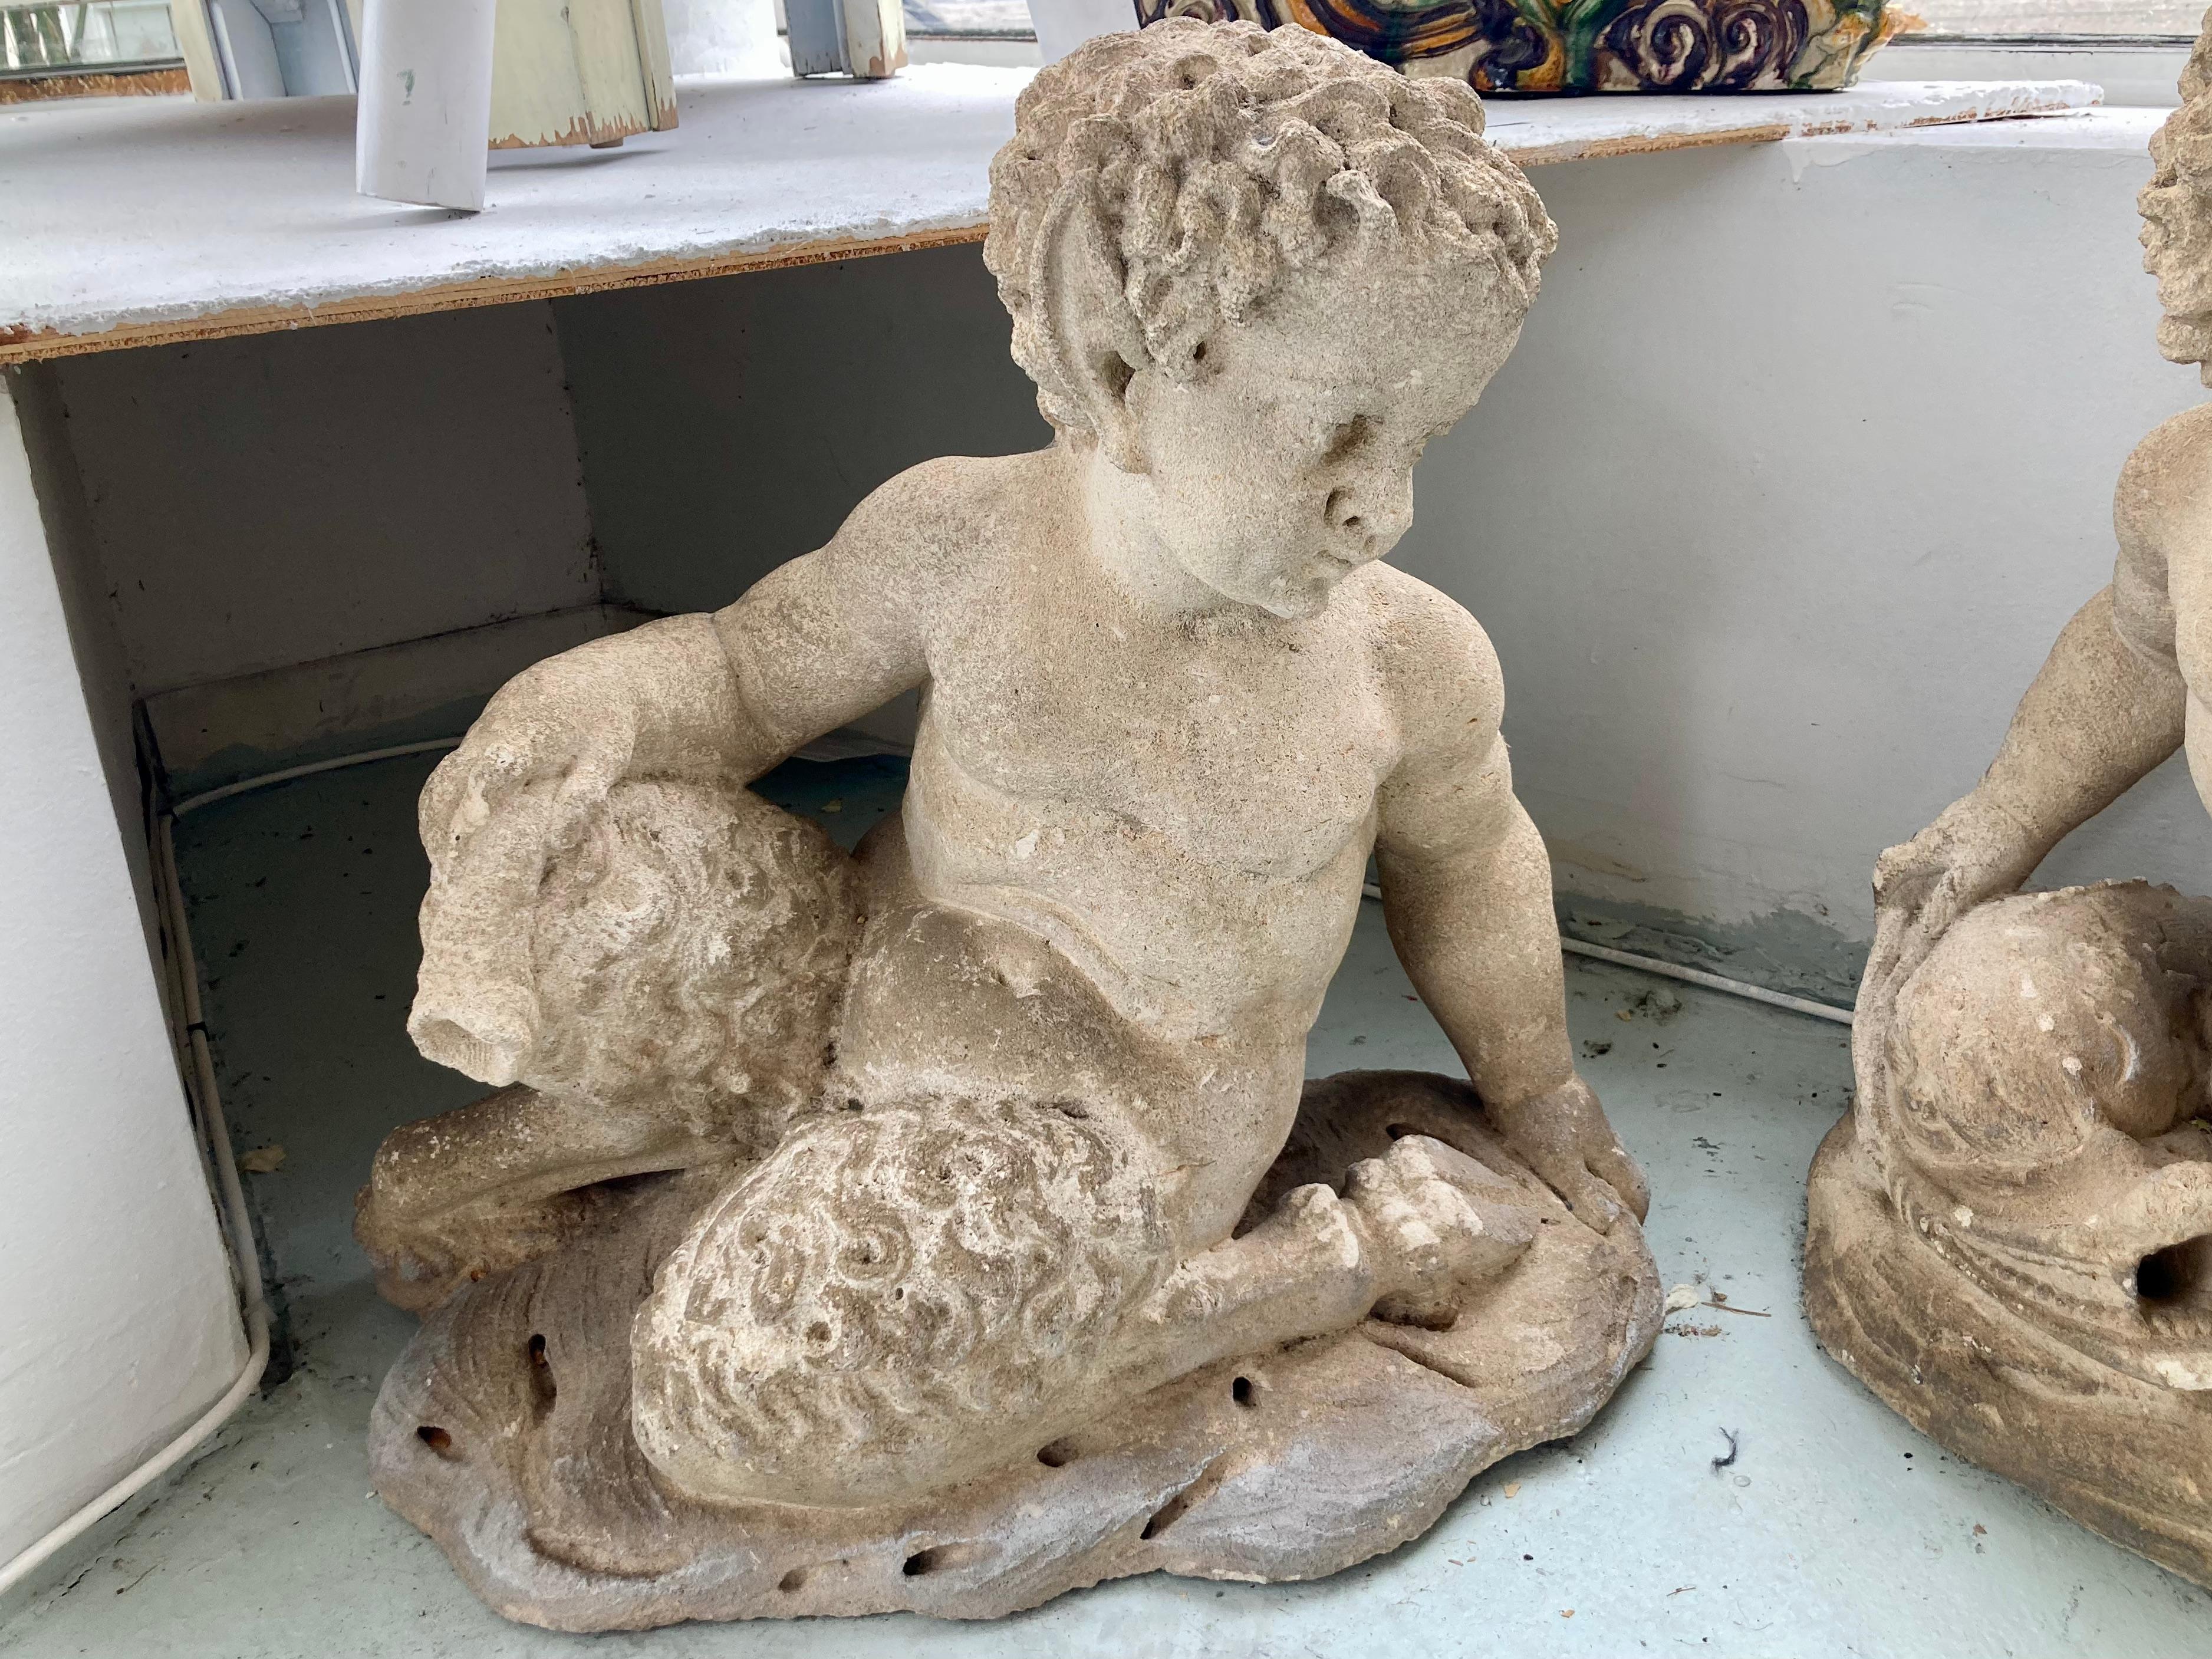 Pair of French carved stone Putti and Pan garden statues. See our collection of garden statues featuring Pan and Putti in our inventory.